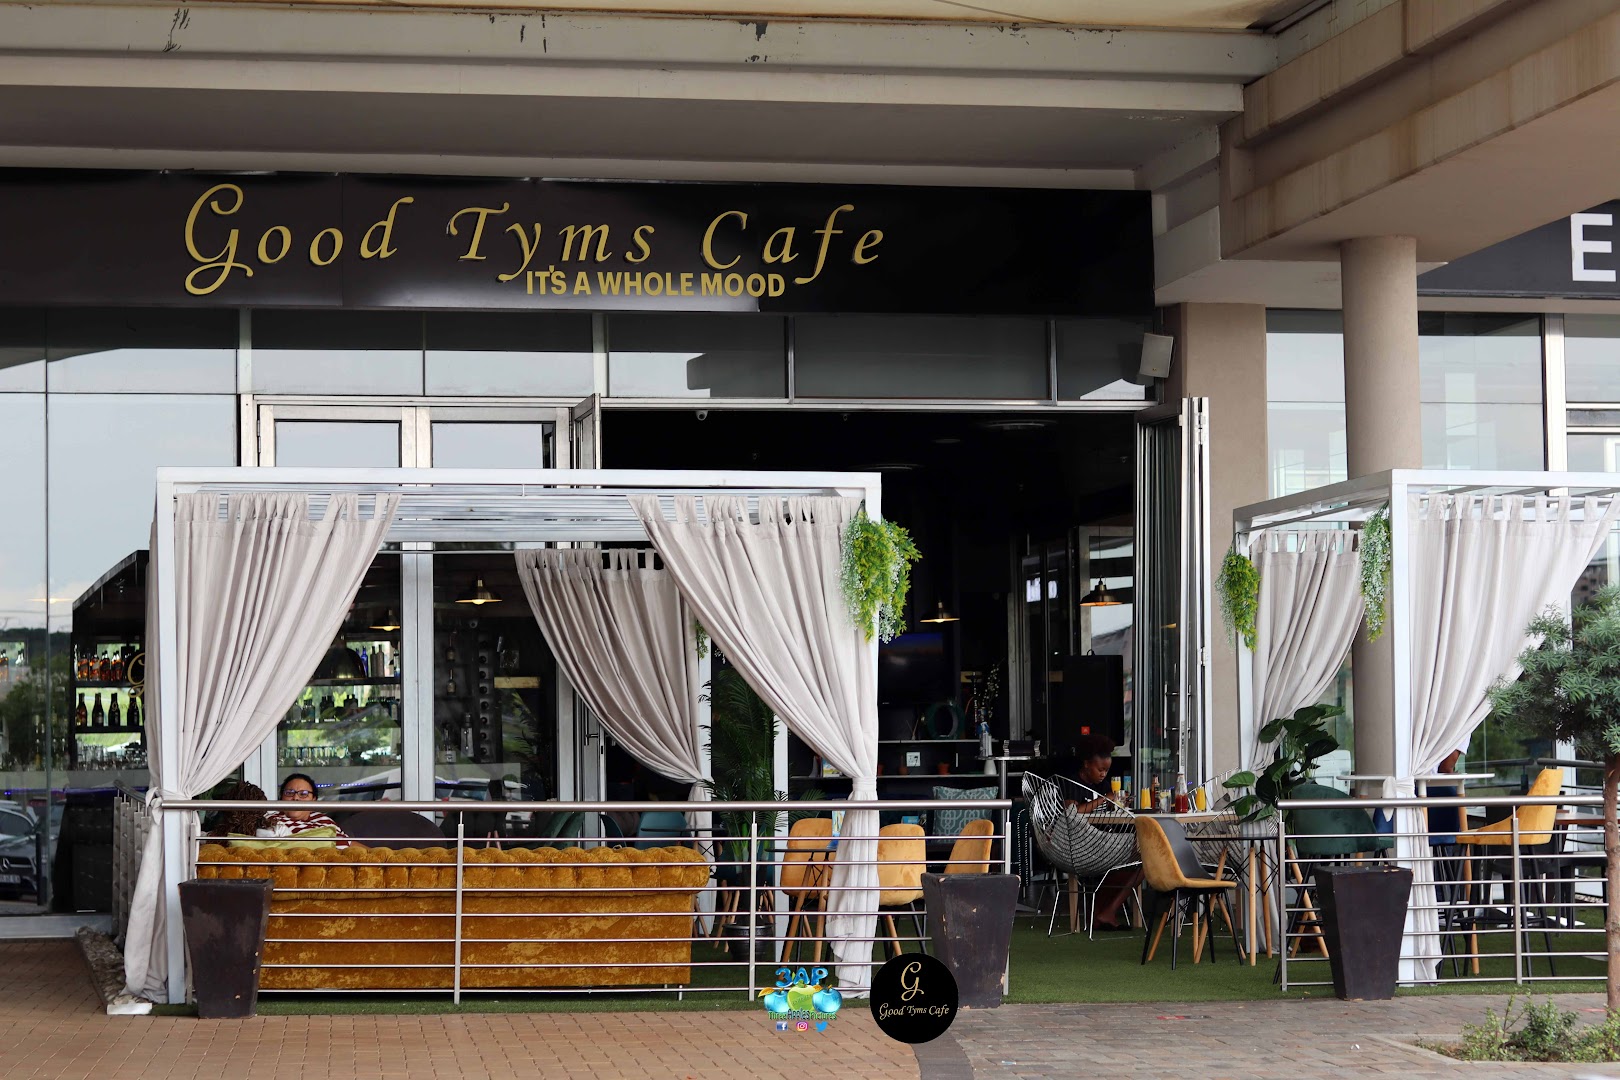 Good tyms cafe